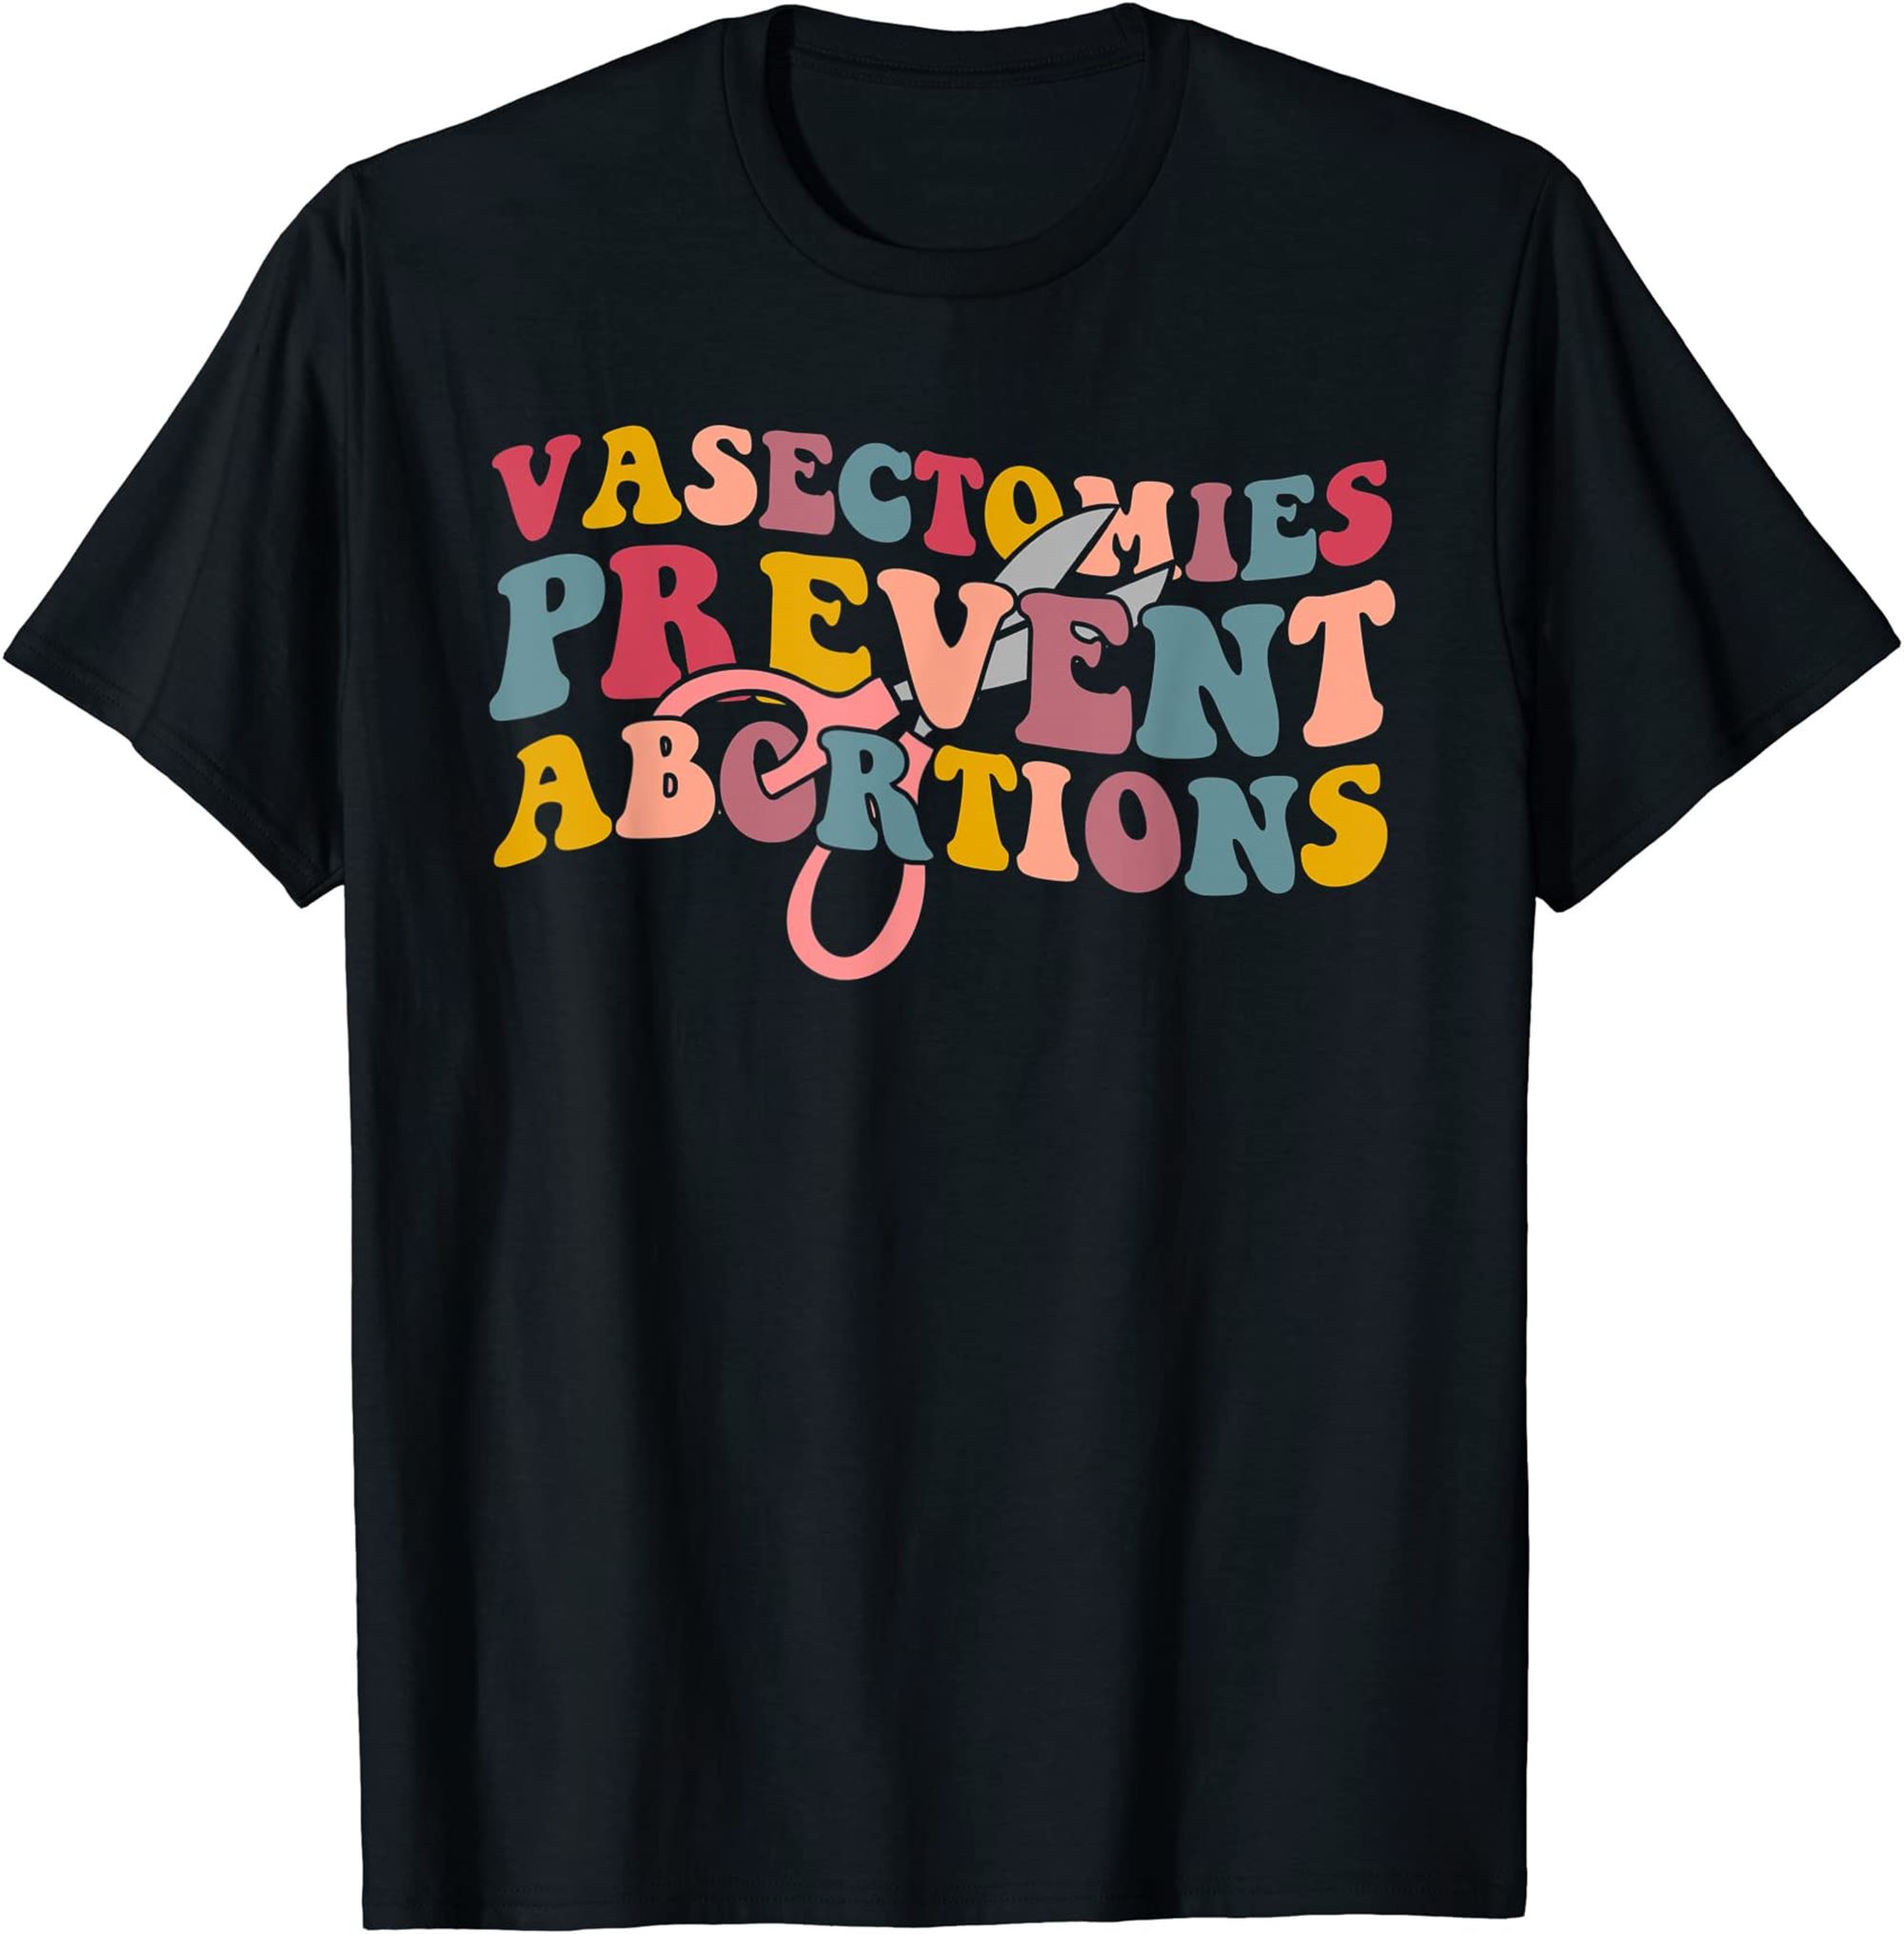 Vasectomies Prevent Abortions Womens Pro Choice Feminist T-shirt Size Up To 5xl